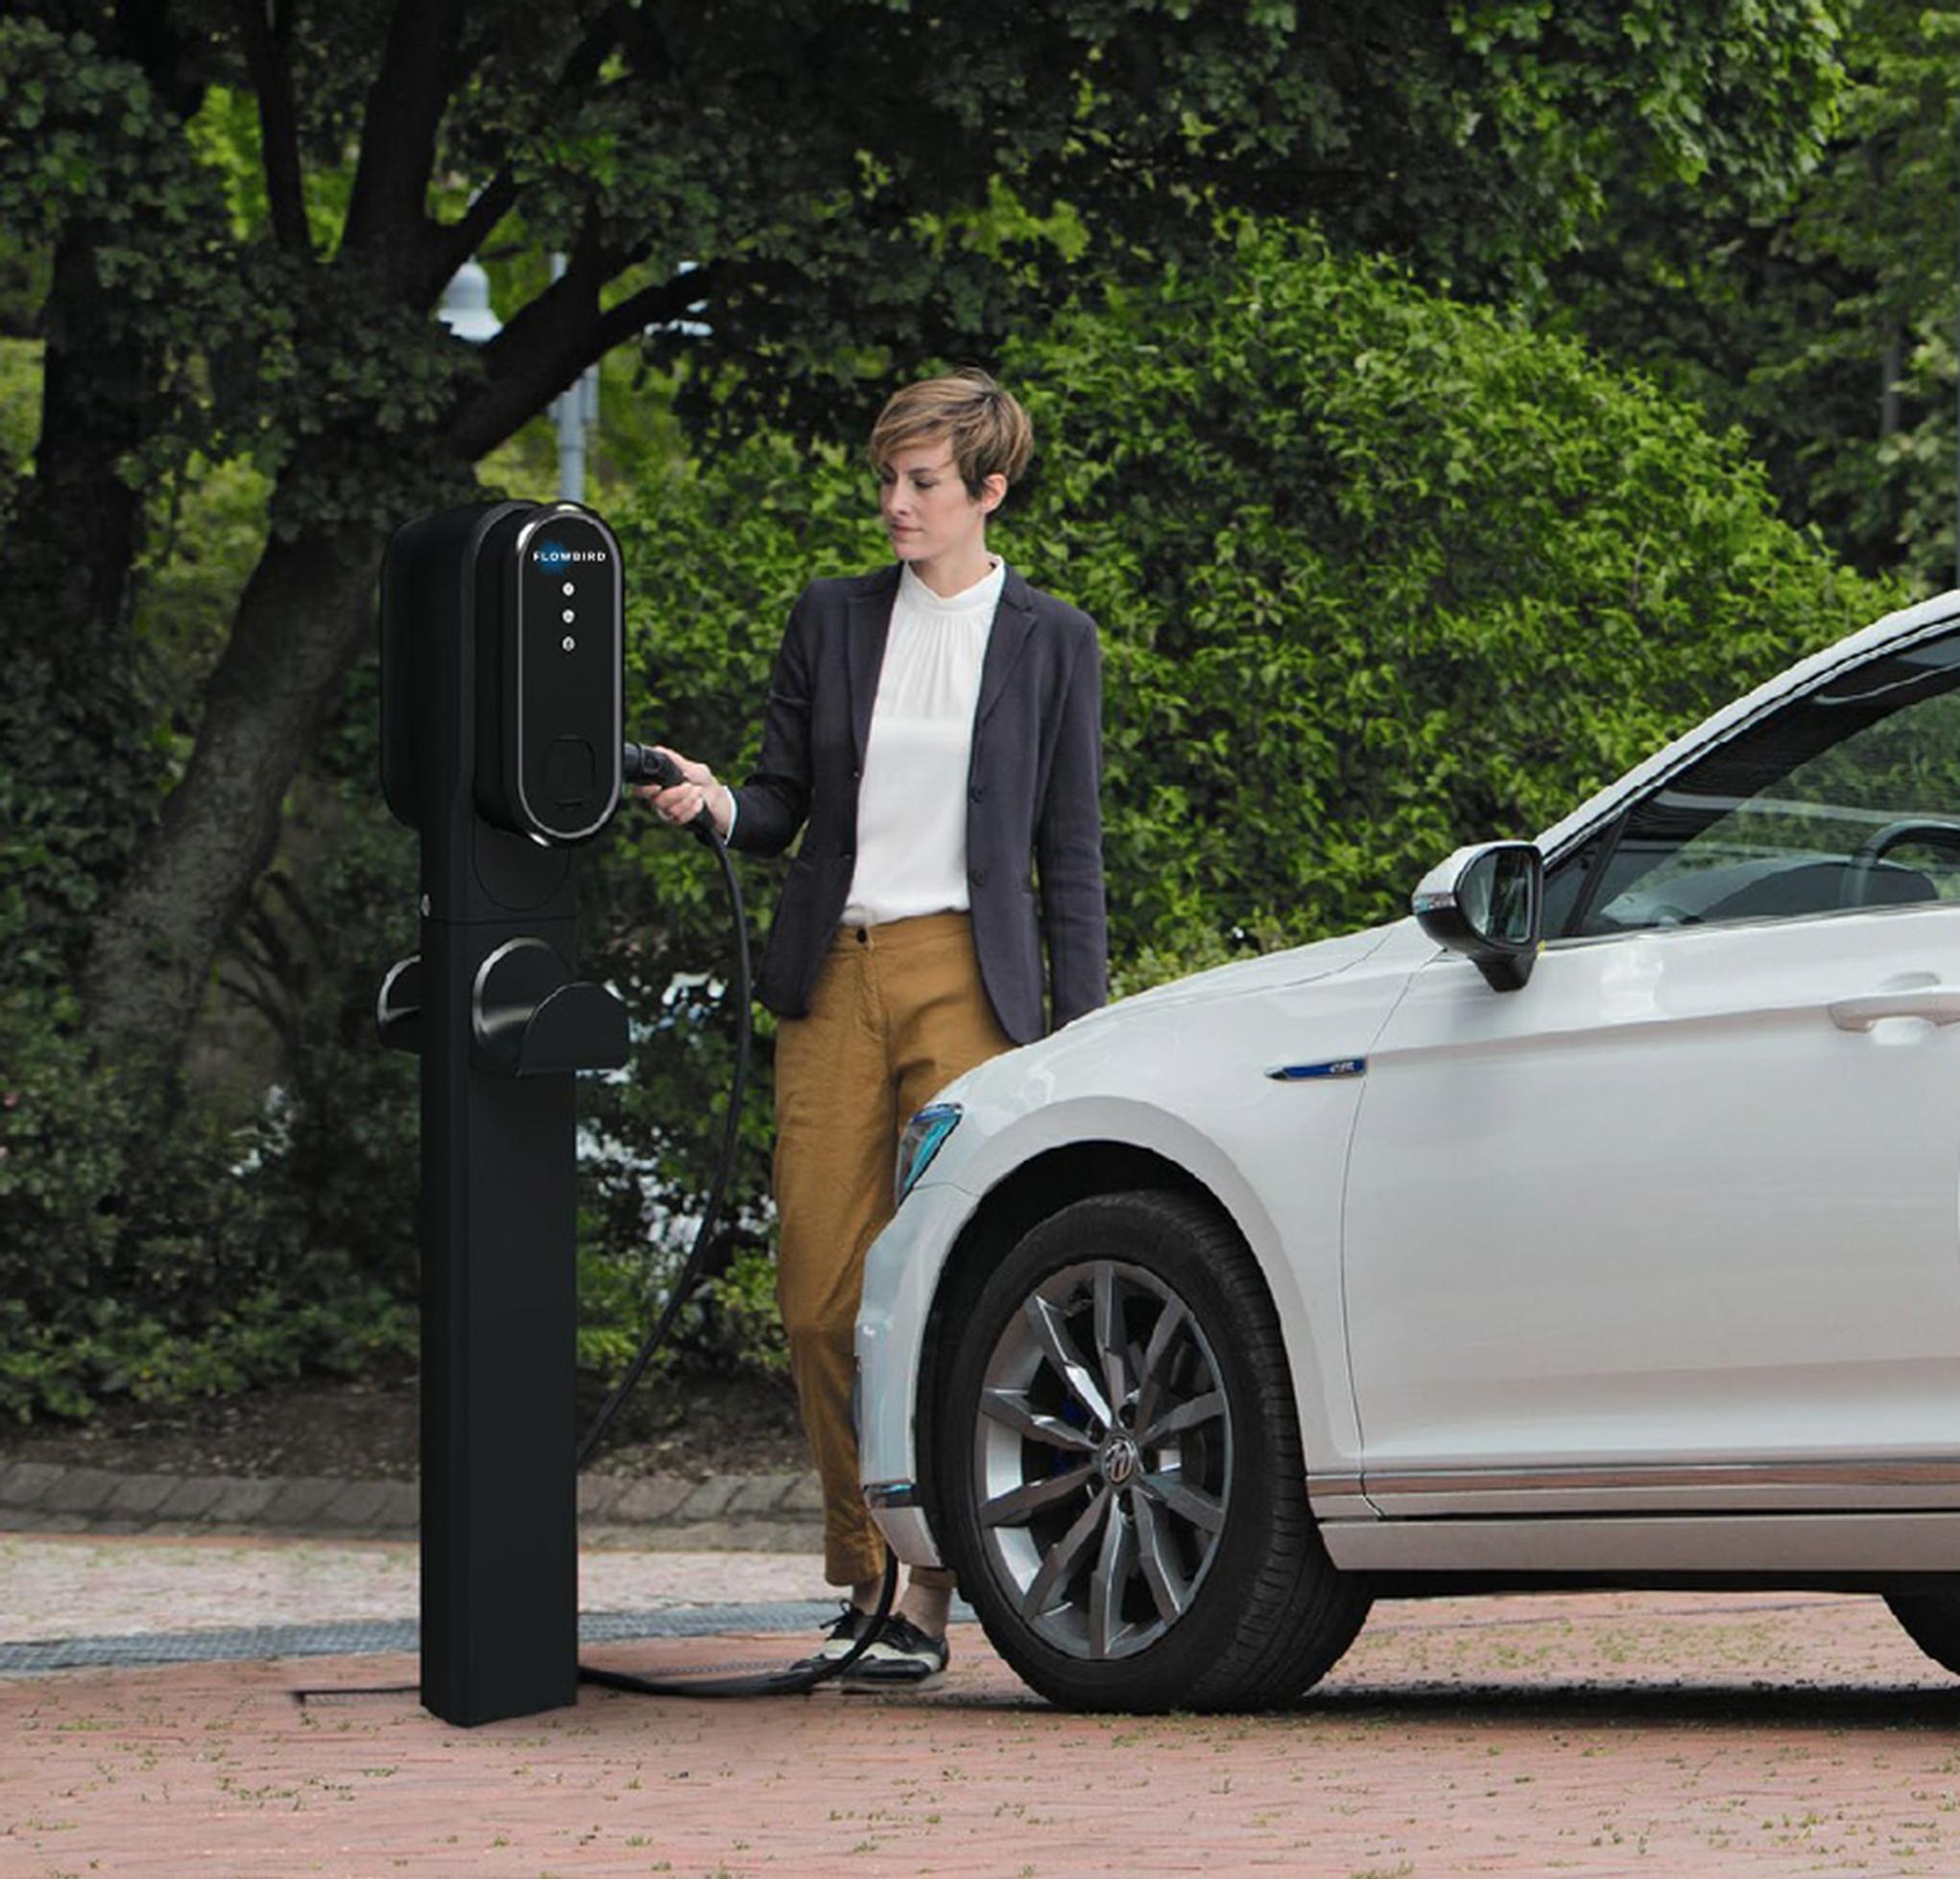 The parking and EV sectors must embrace new ways of connecting with drivers